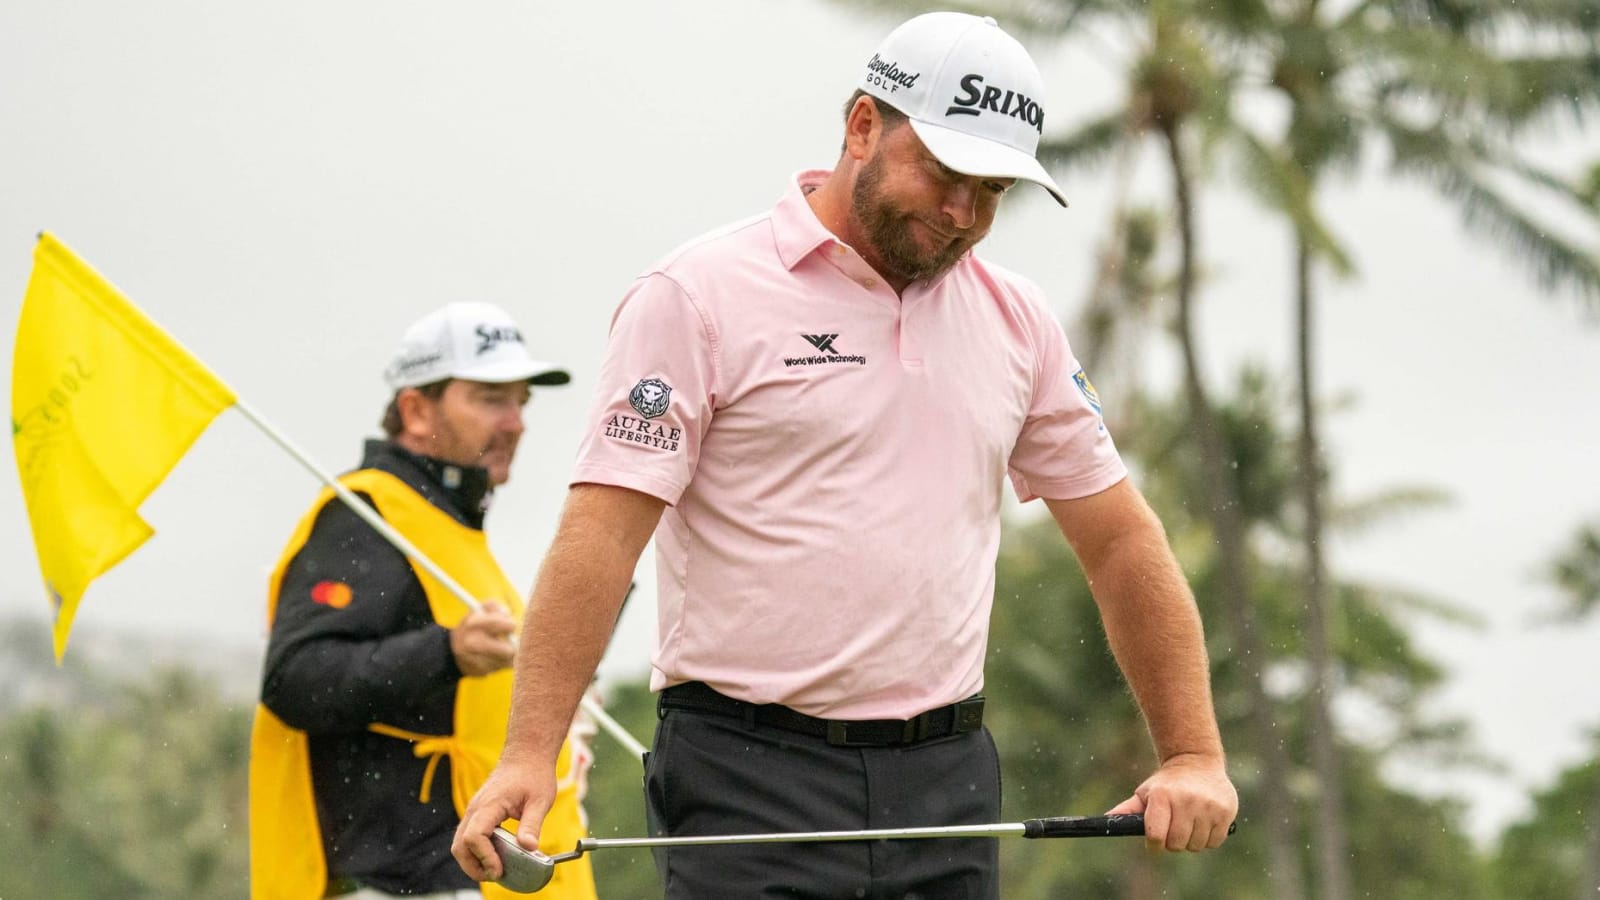 Graeme McDowell to withdraw from Travelers after caddie tests positive for COVID-19